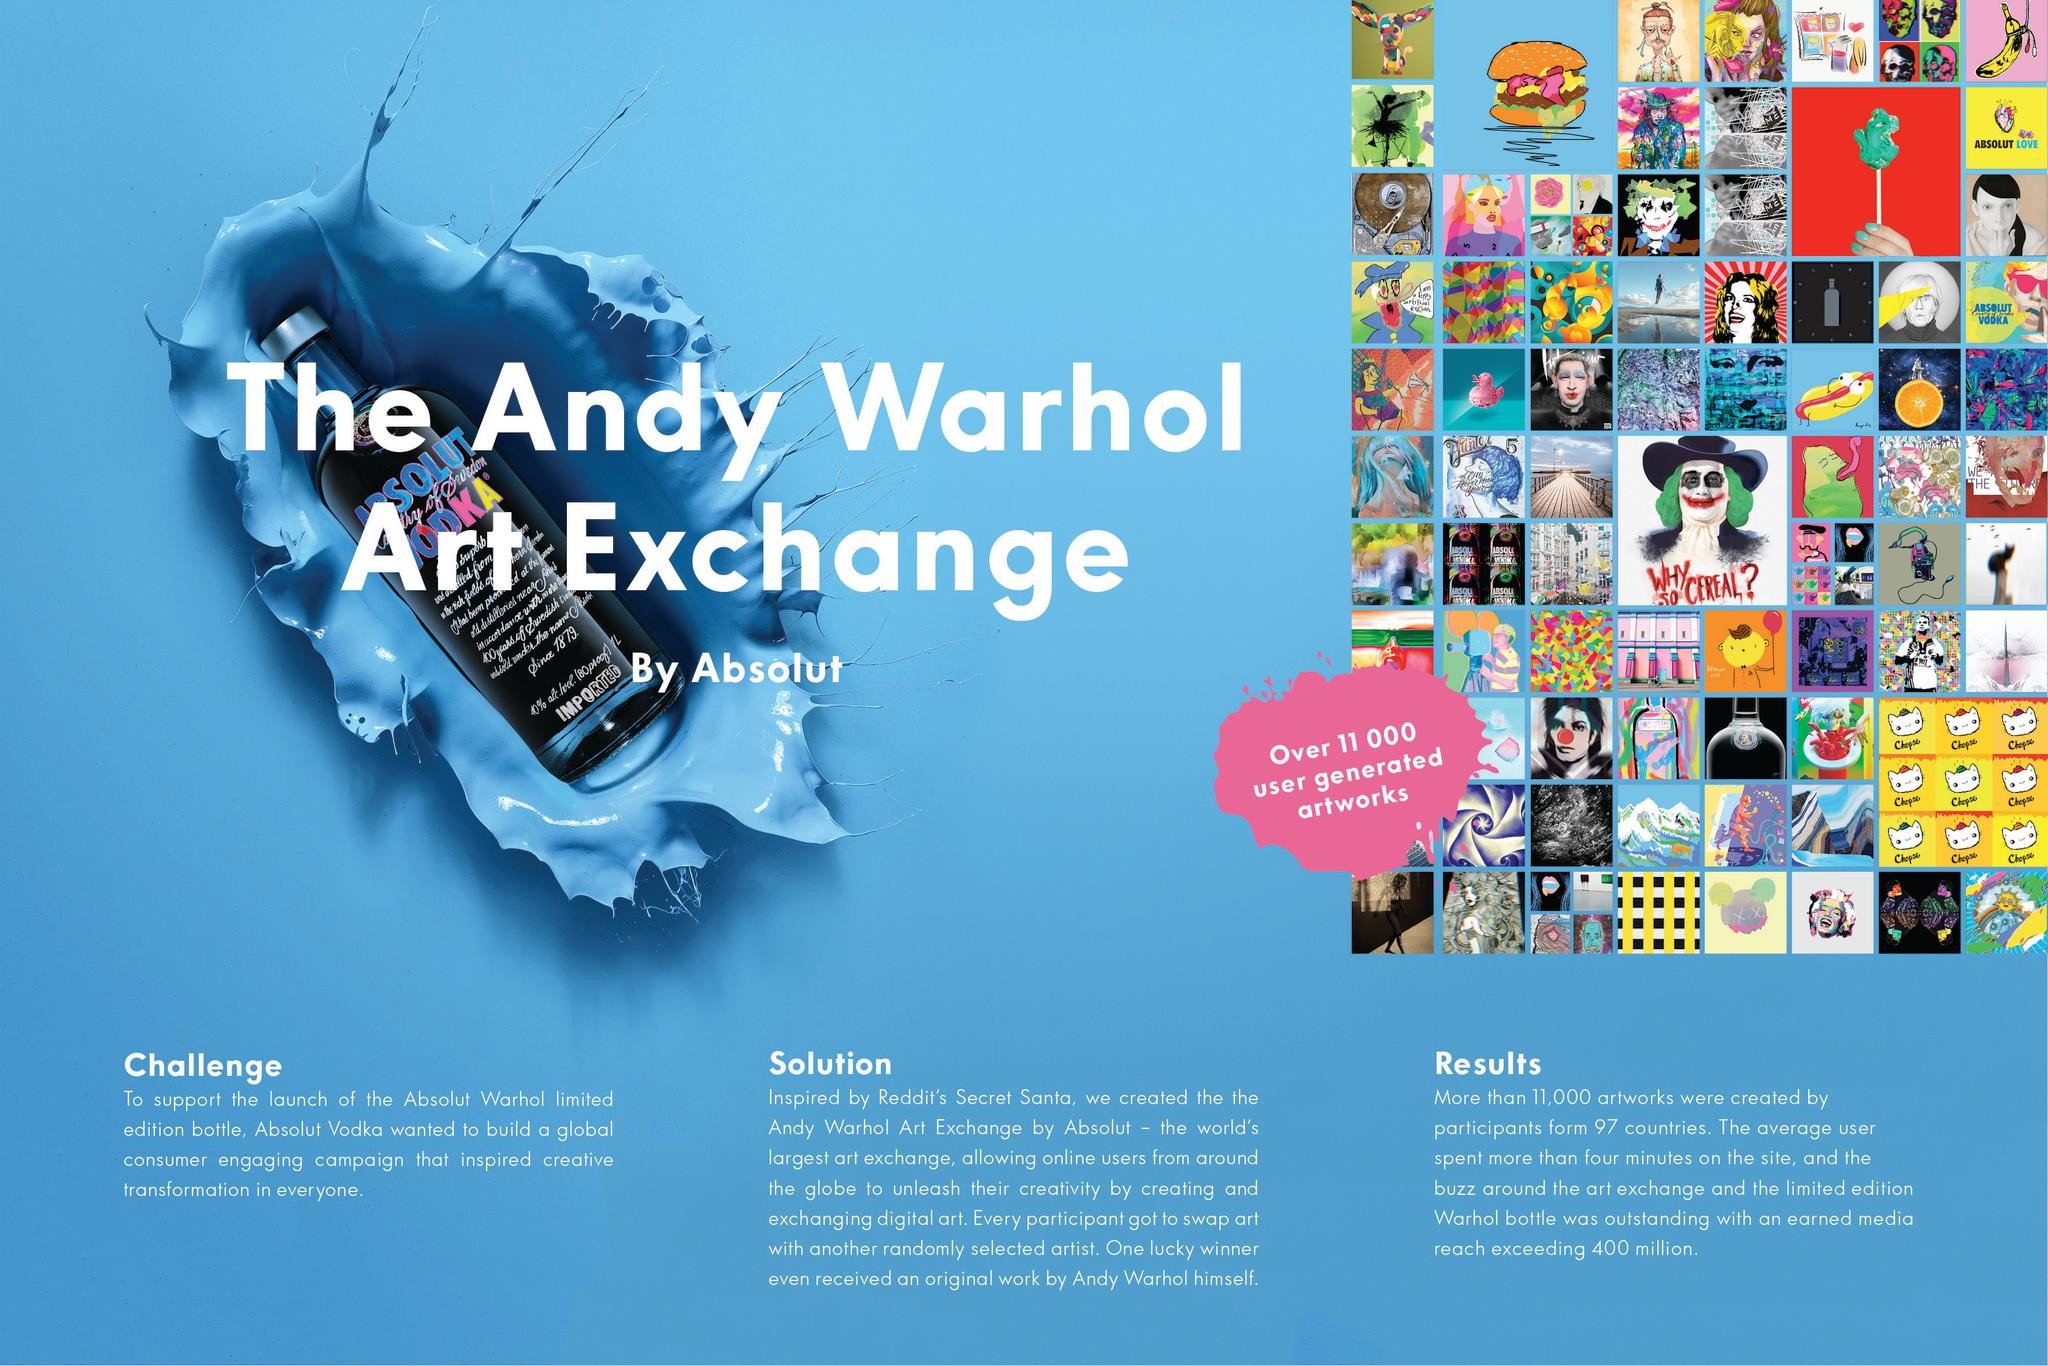 THE ANDY WARHOL ART EXCHANGE BY ABSOLUT